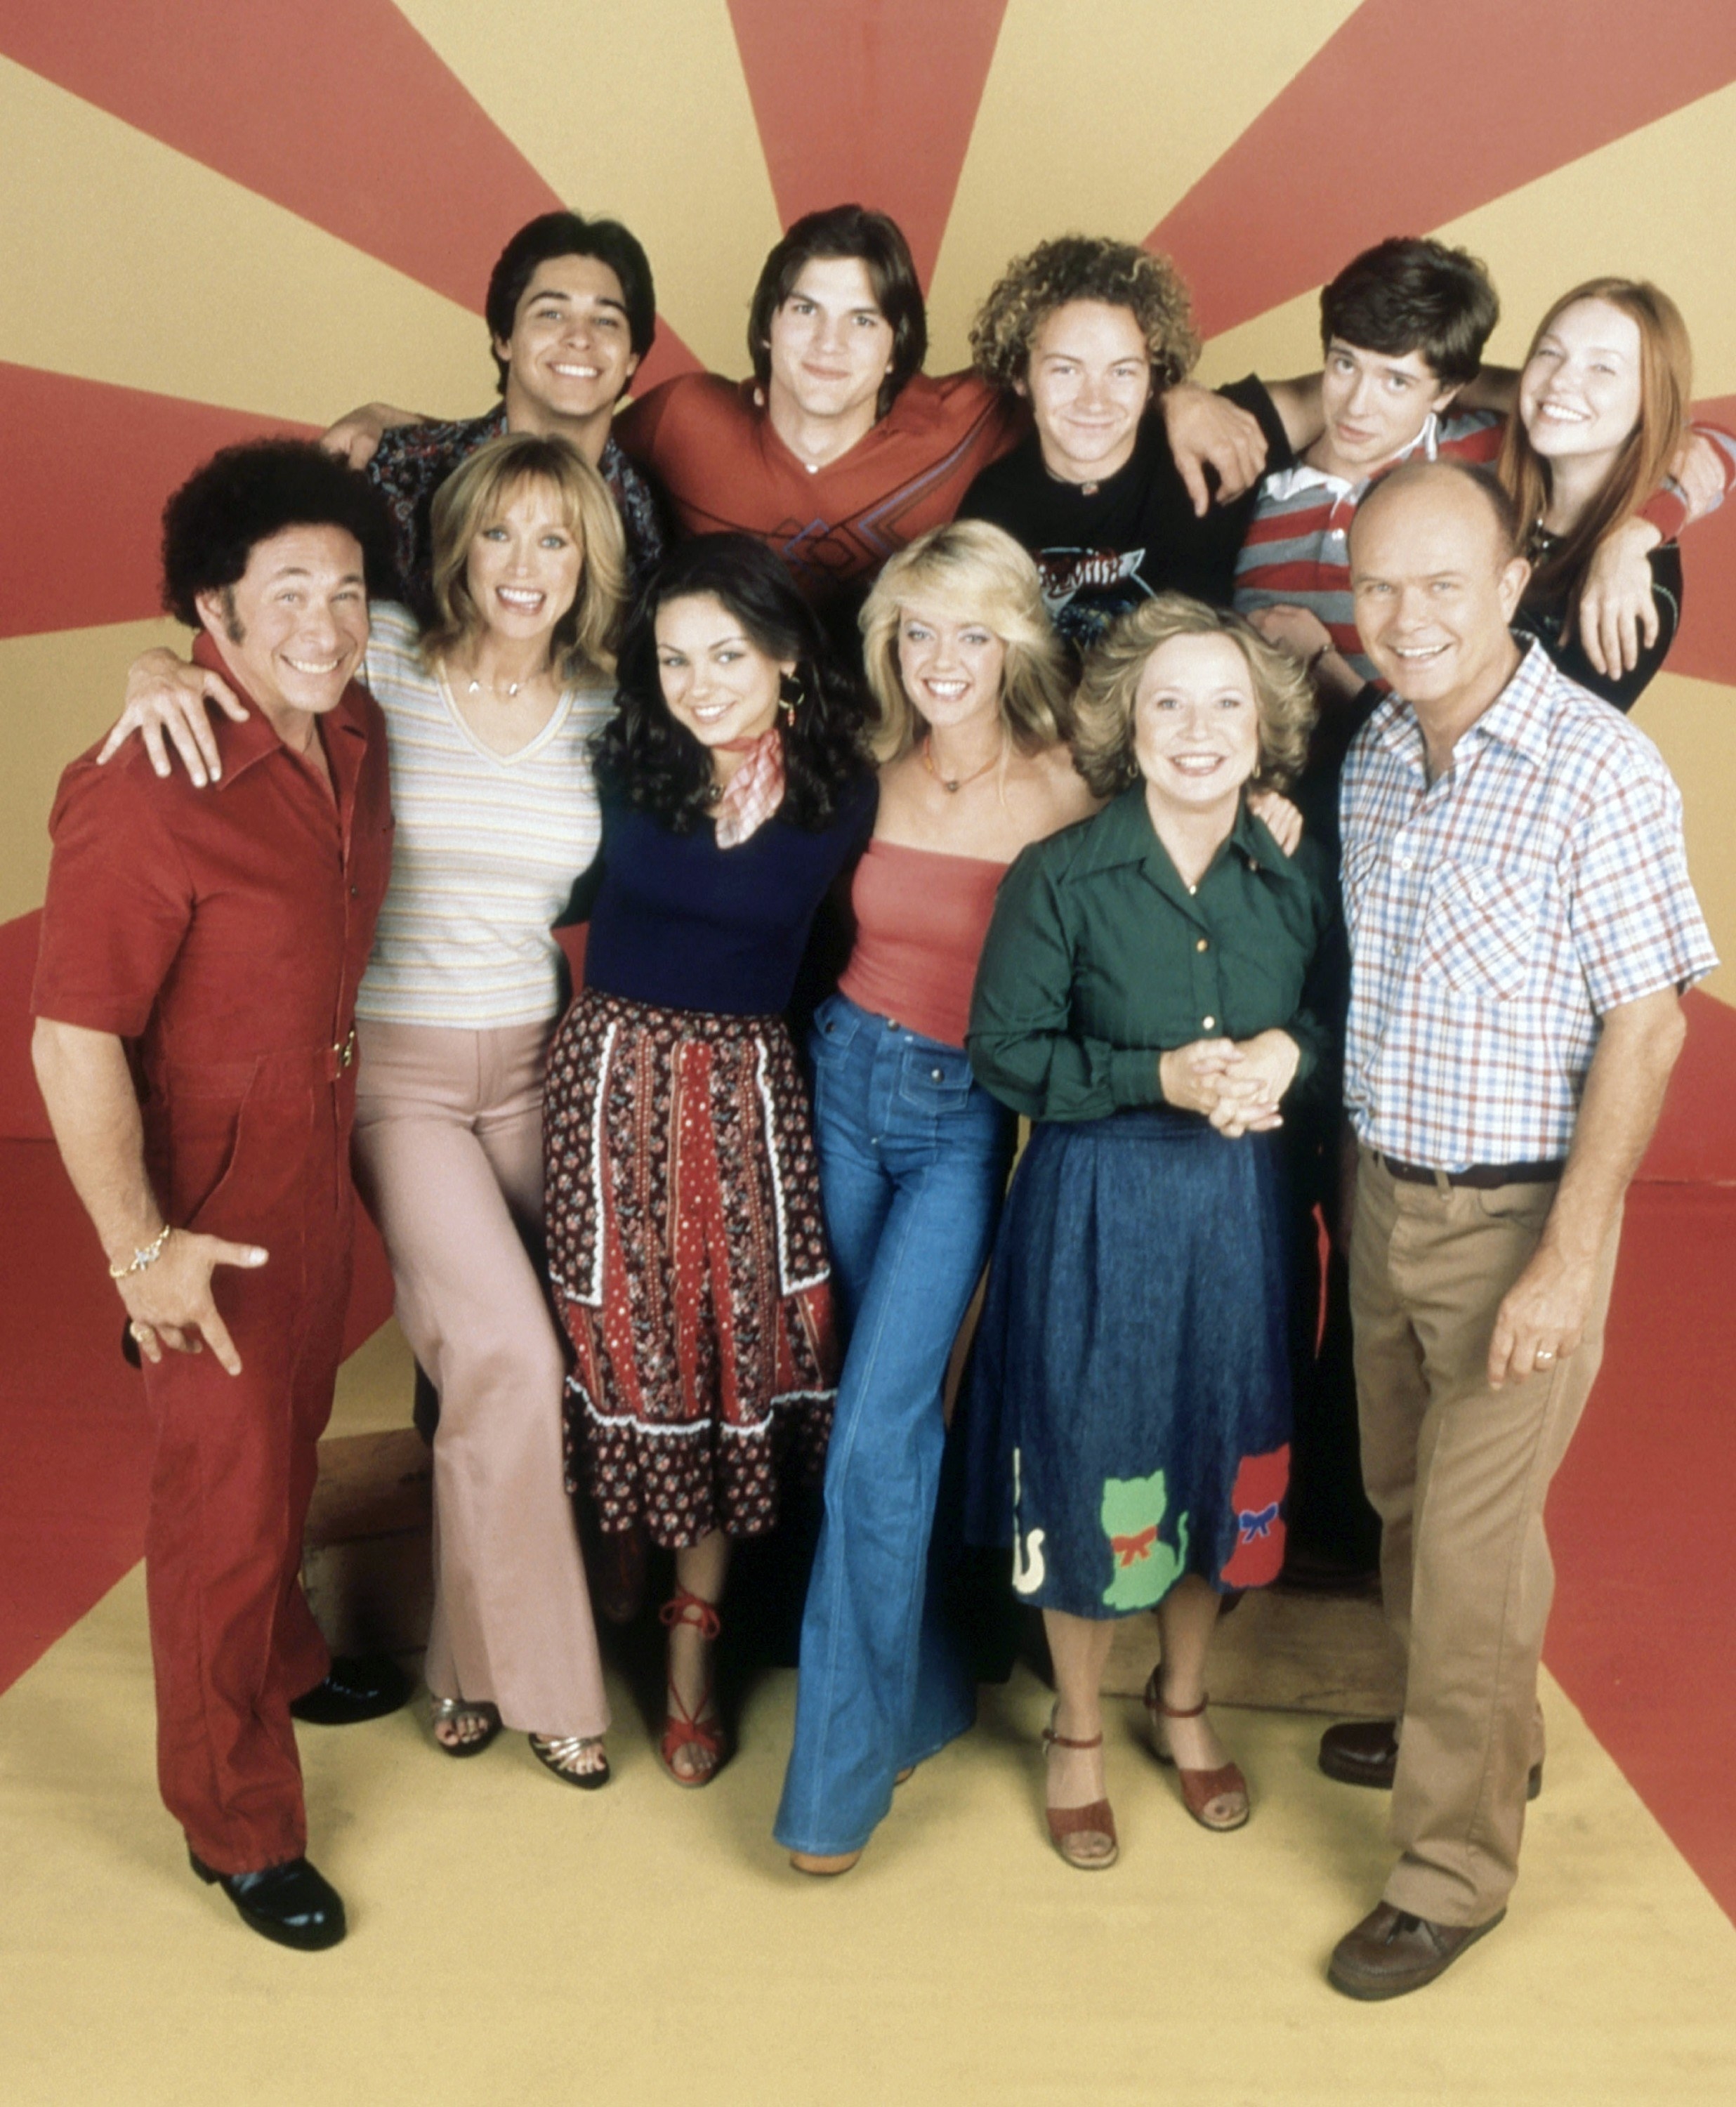 A group shot of the cast smiling